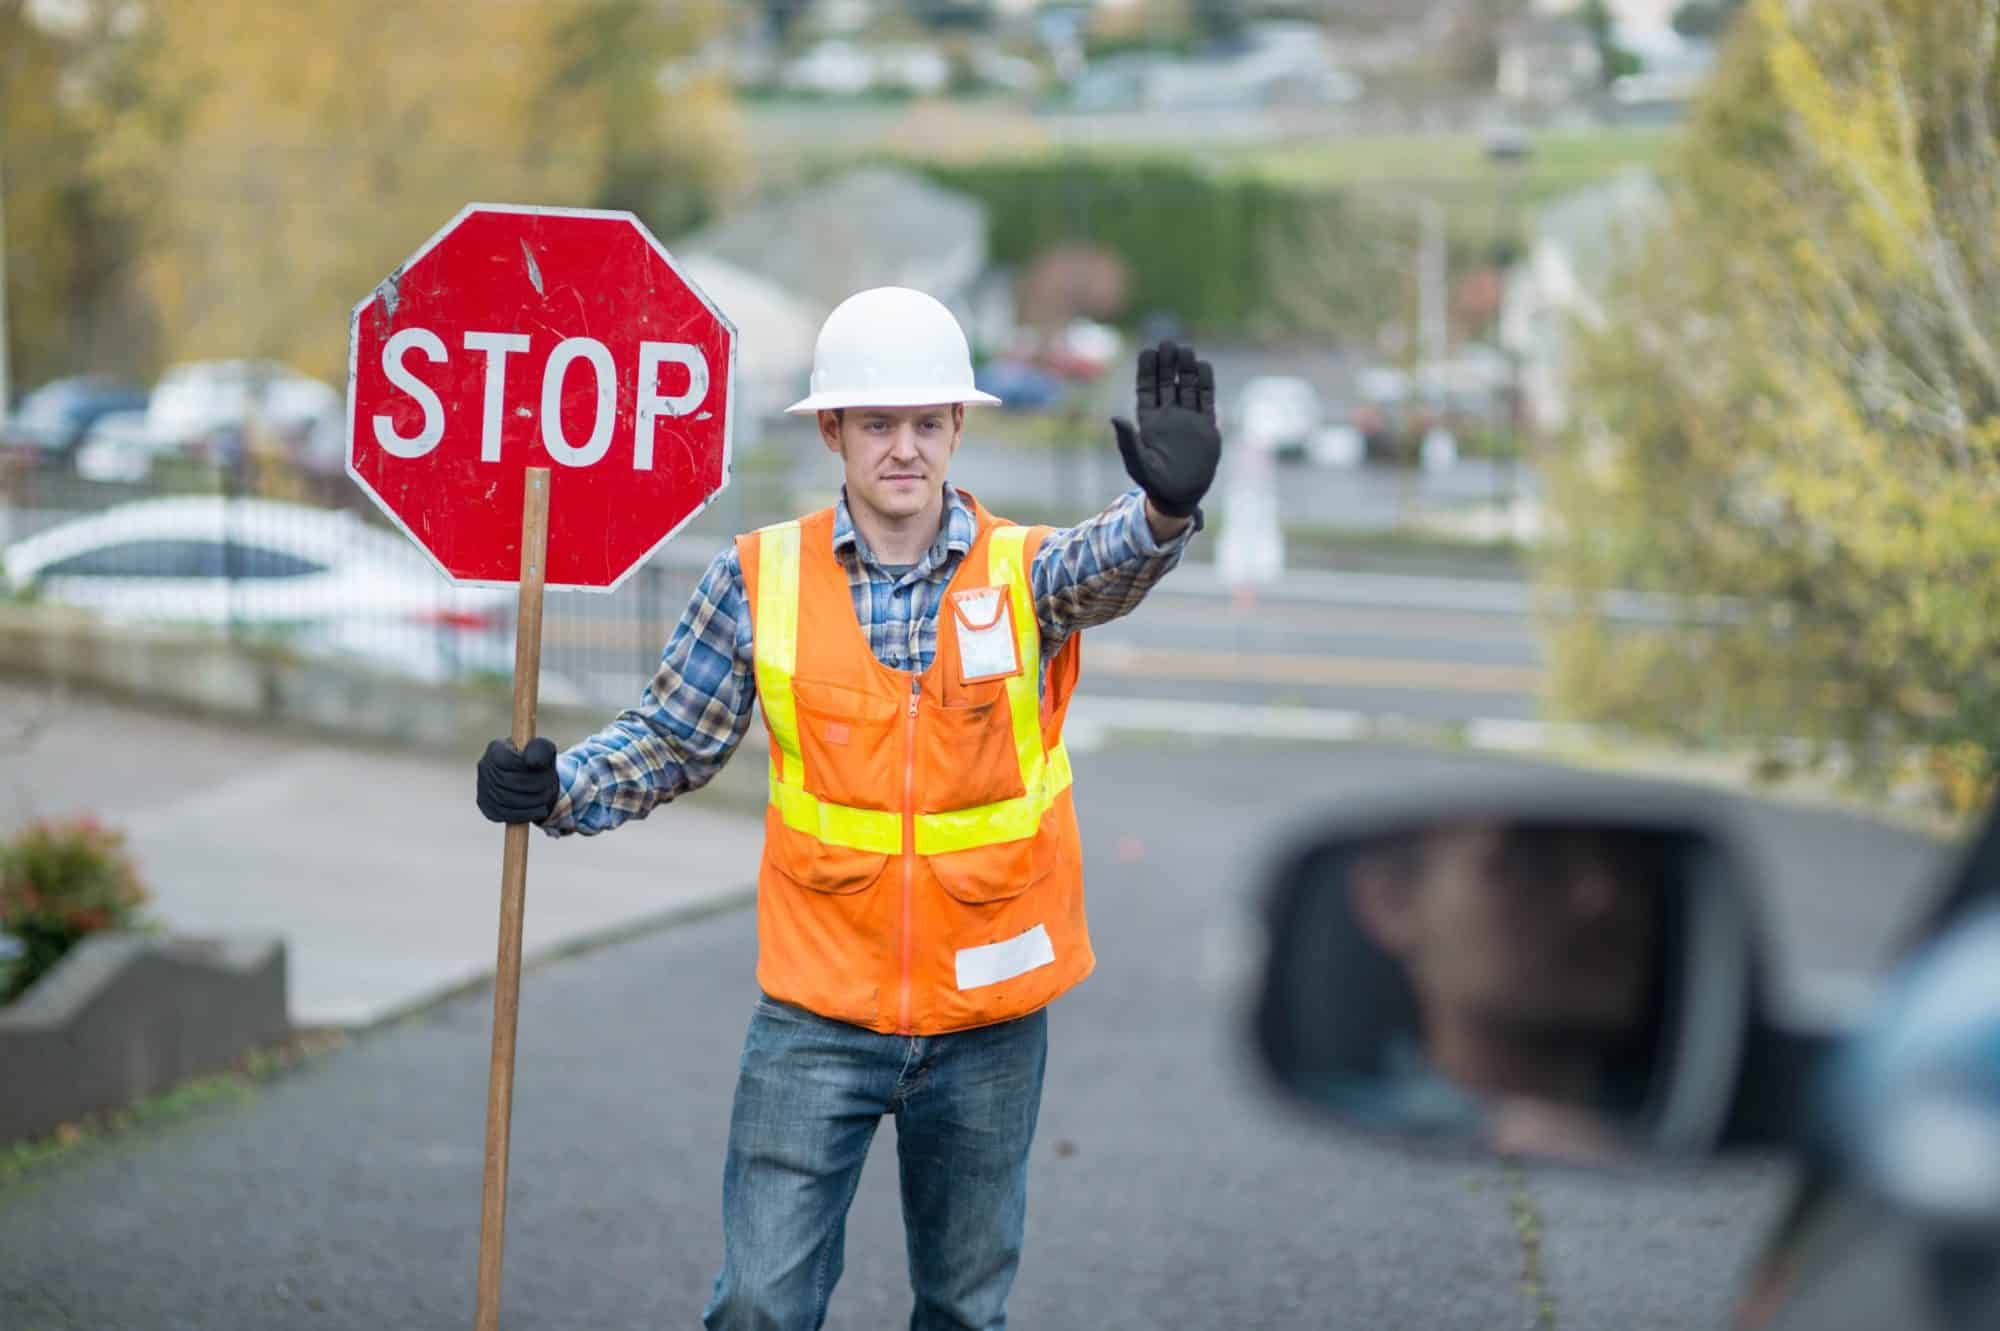 Flagger holds up stop sign for traffic in construction zone